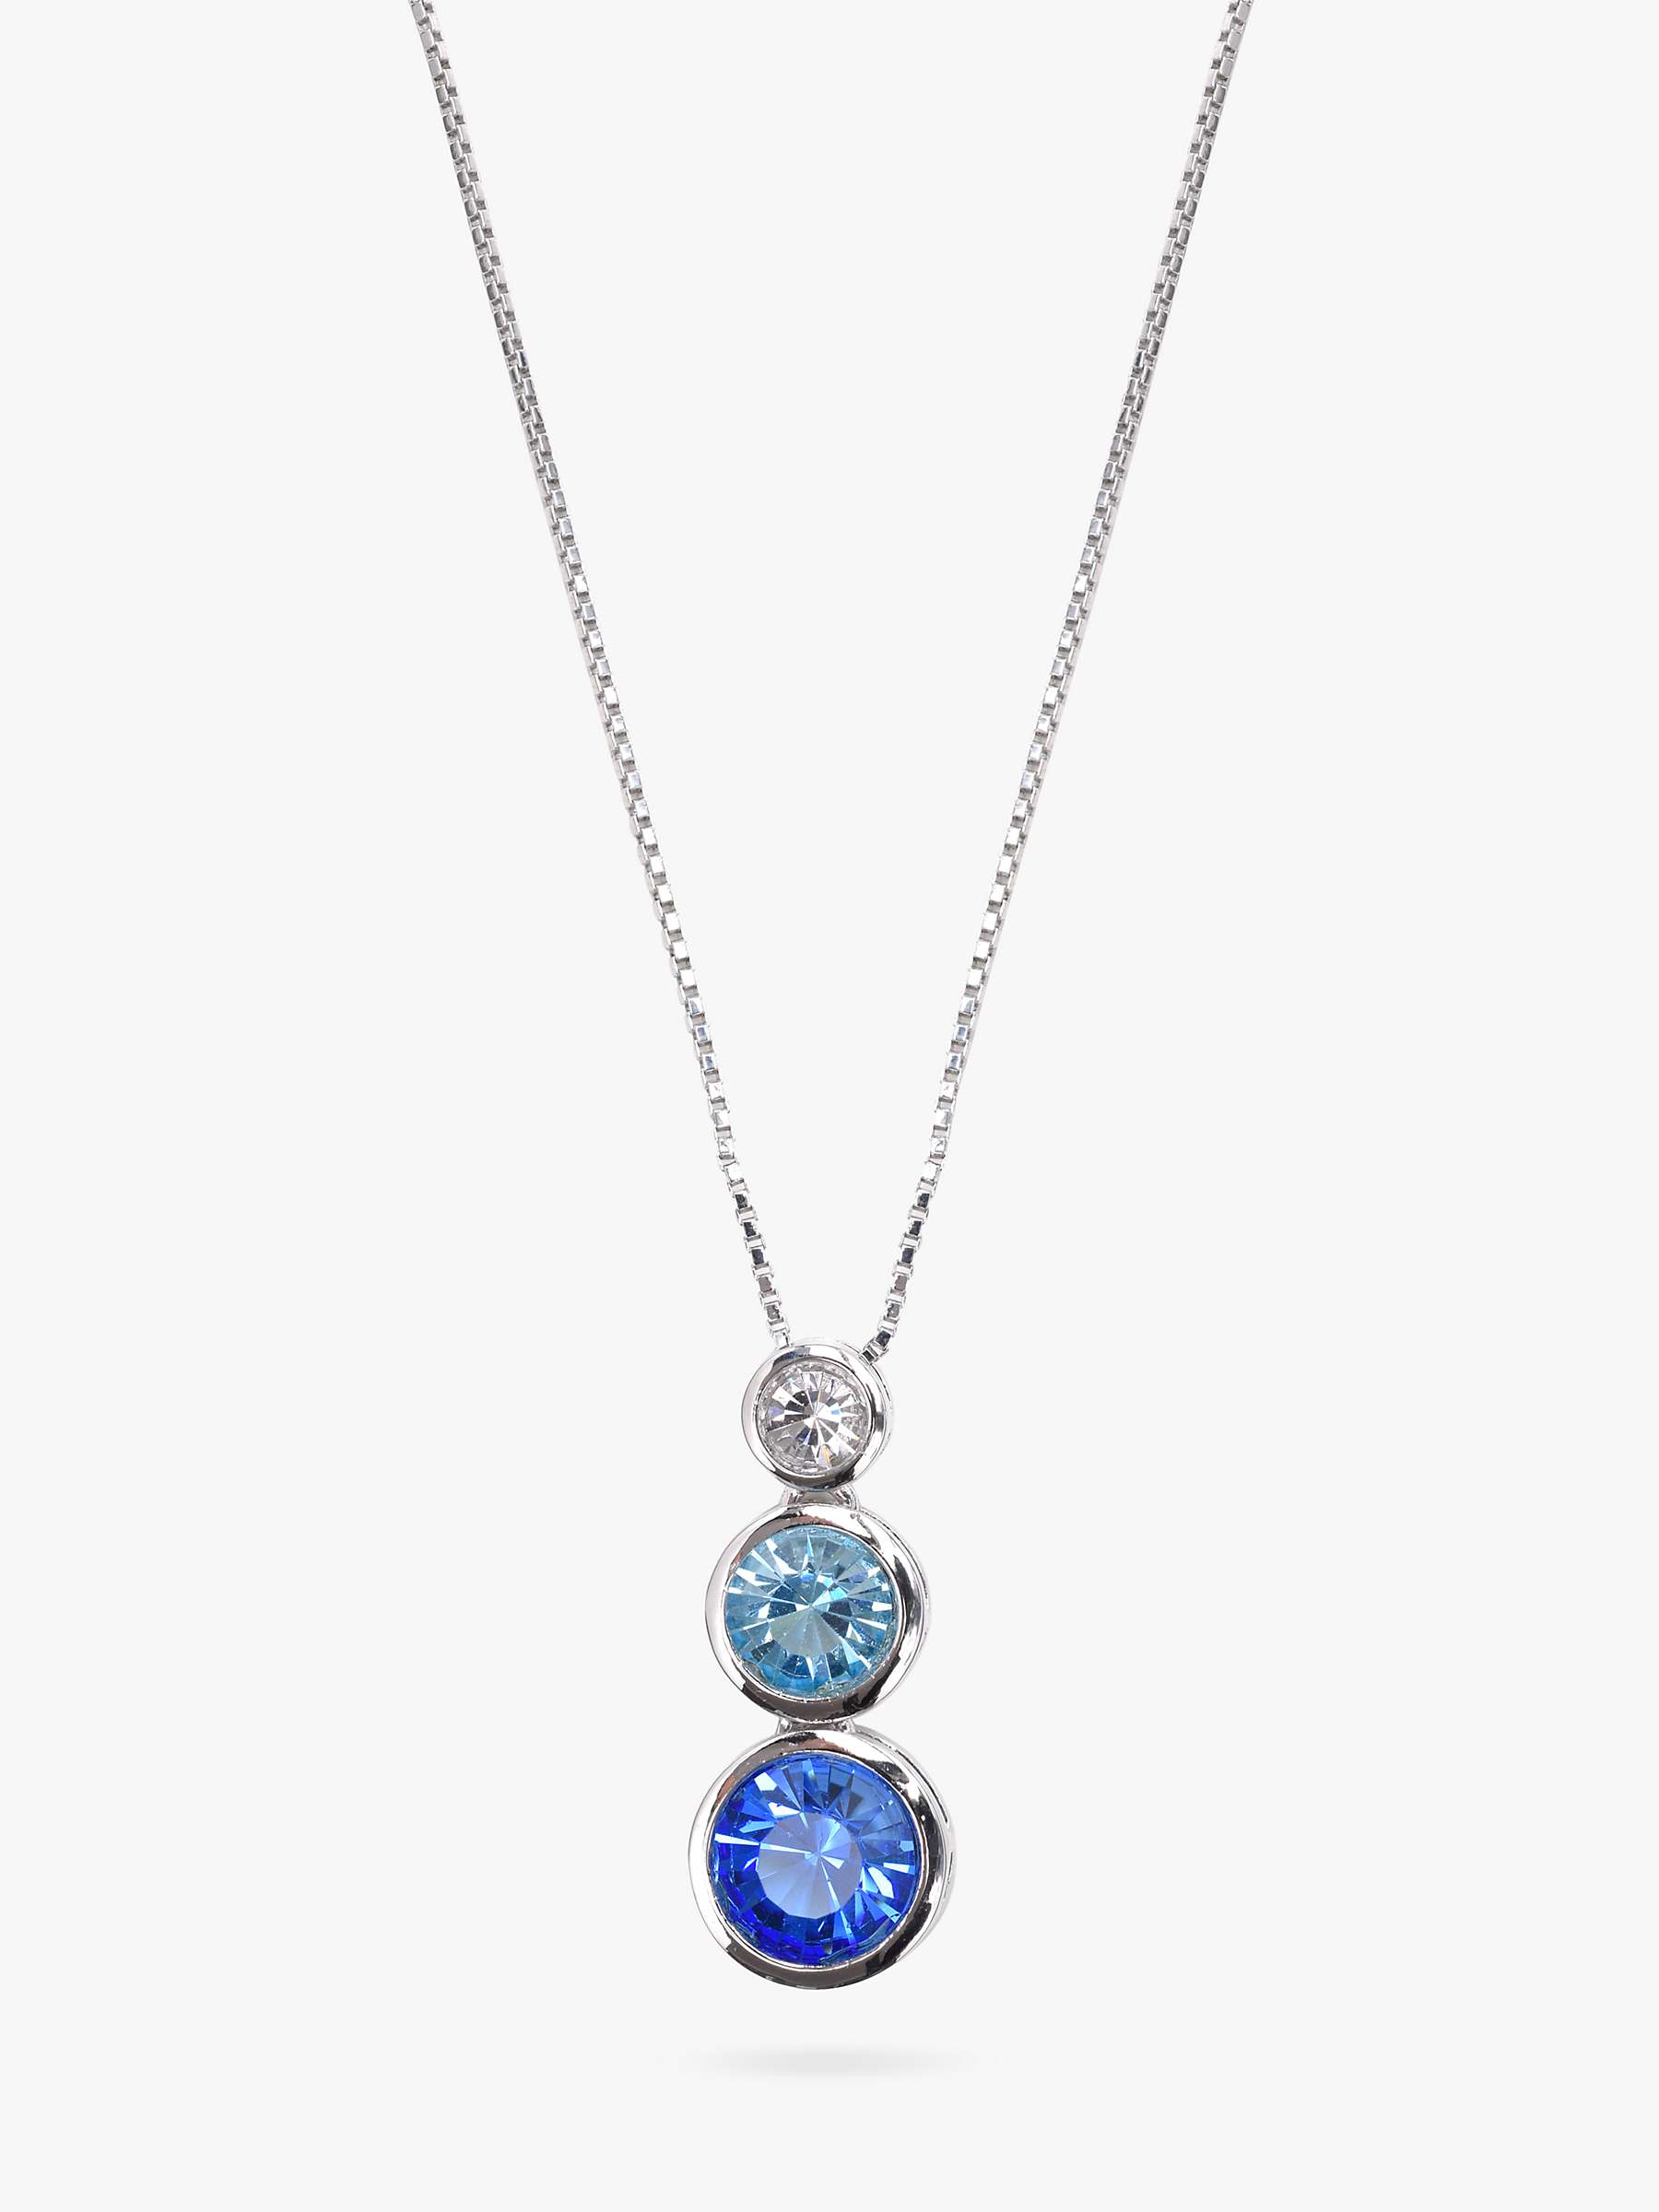 Buy Eclectica Vintage Rhodium Plated Swarovski Crystal Triple Drop Pendant Necklace, Dated Circa 1990s Online at johnlewis.com